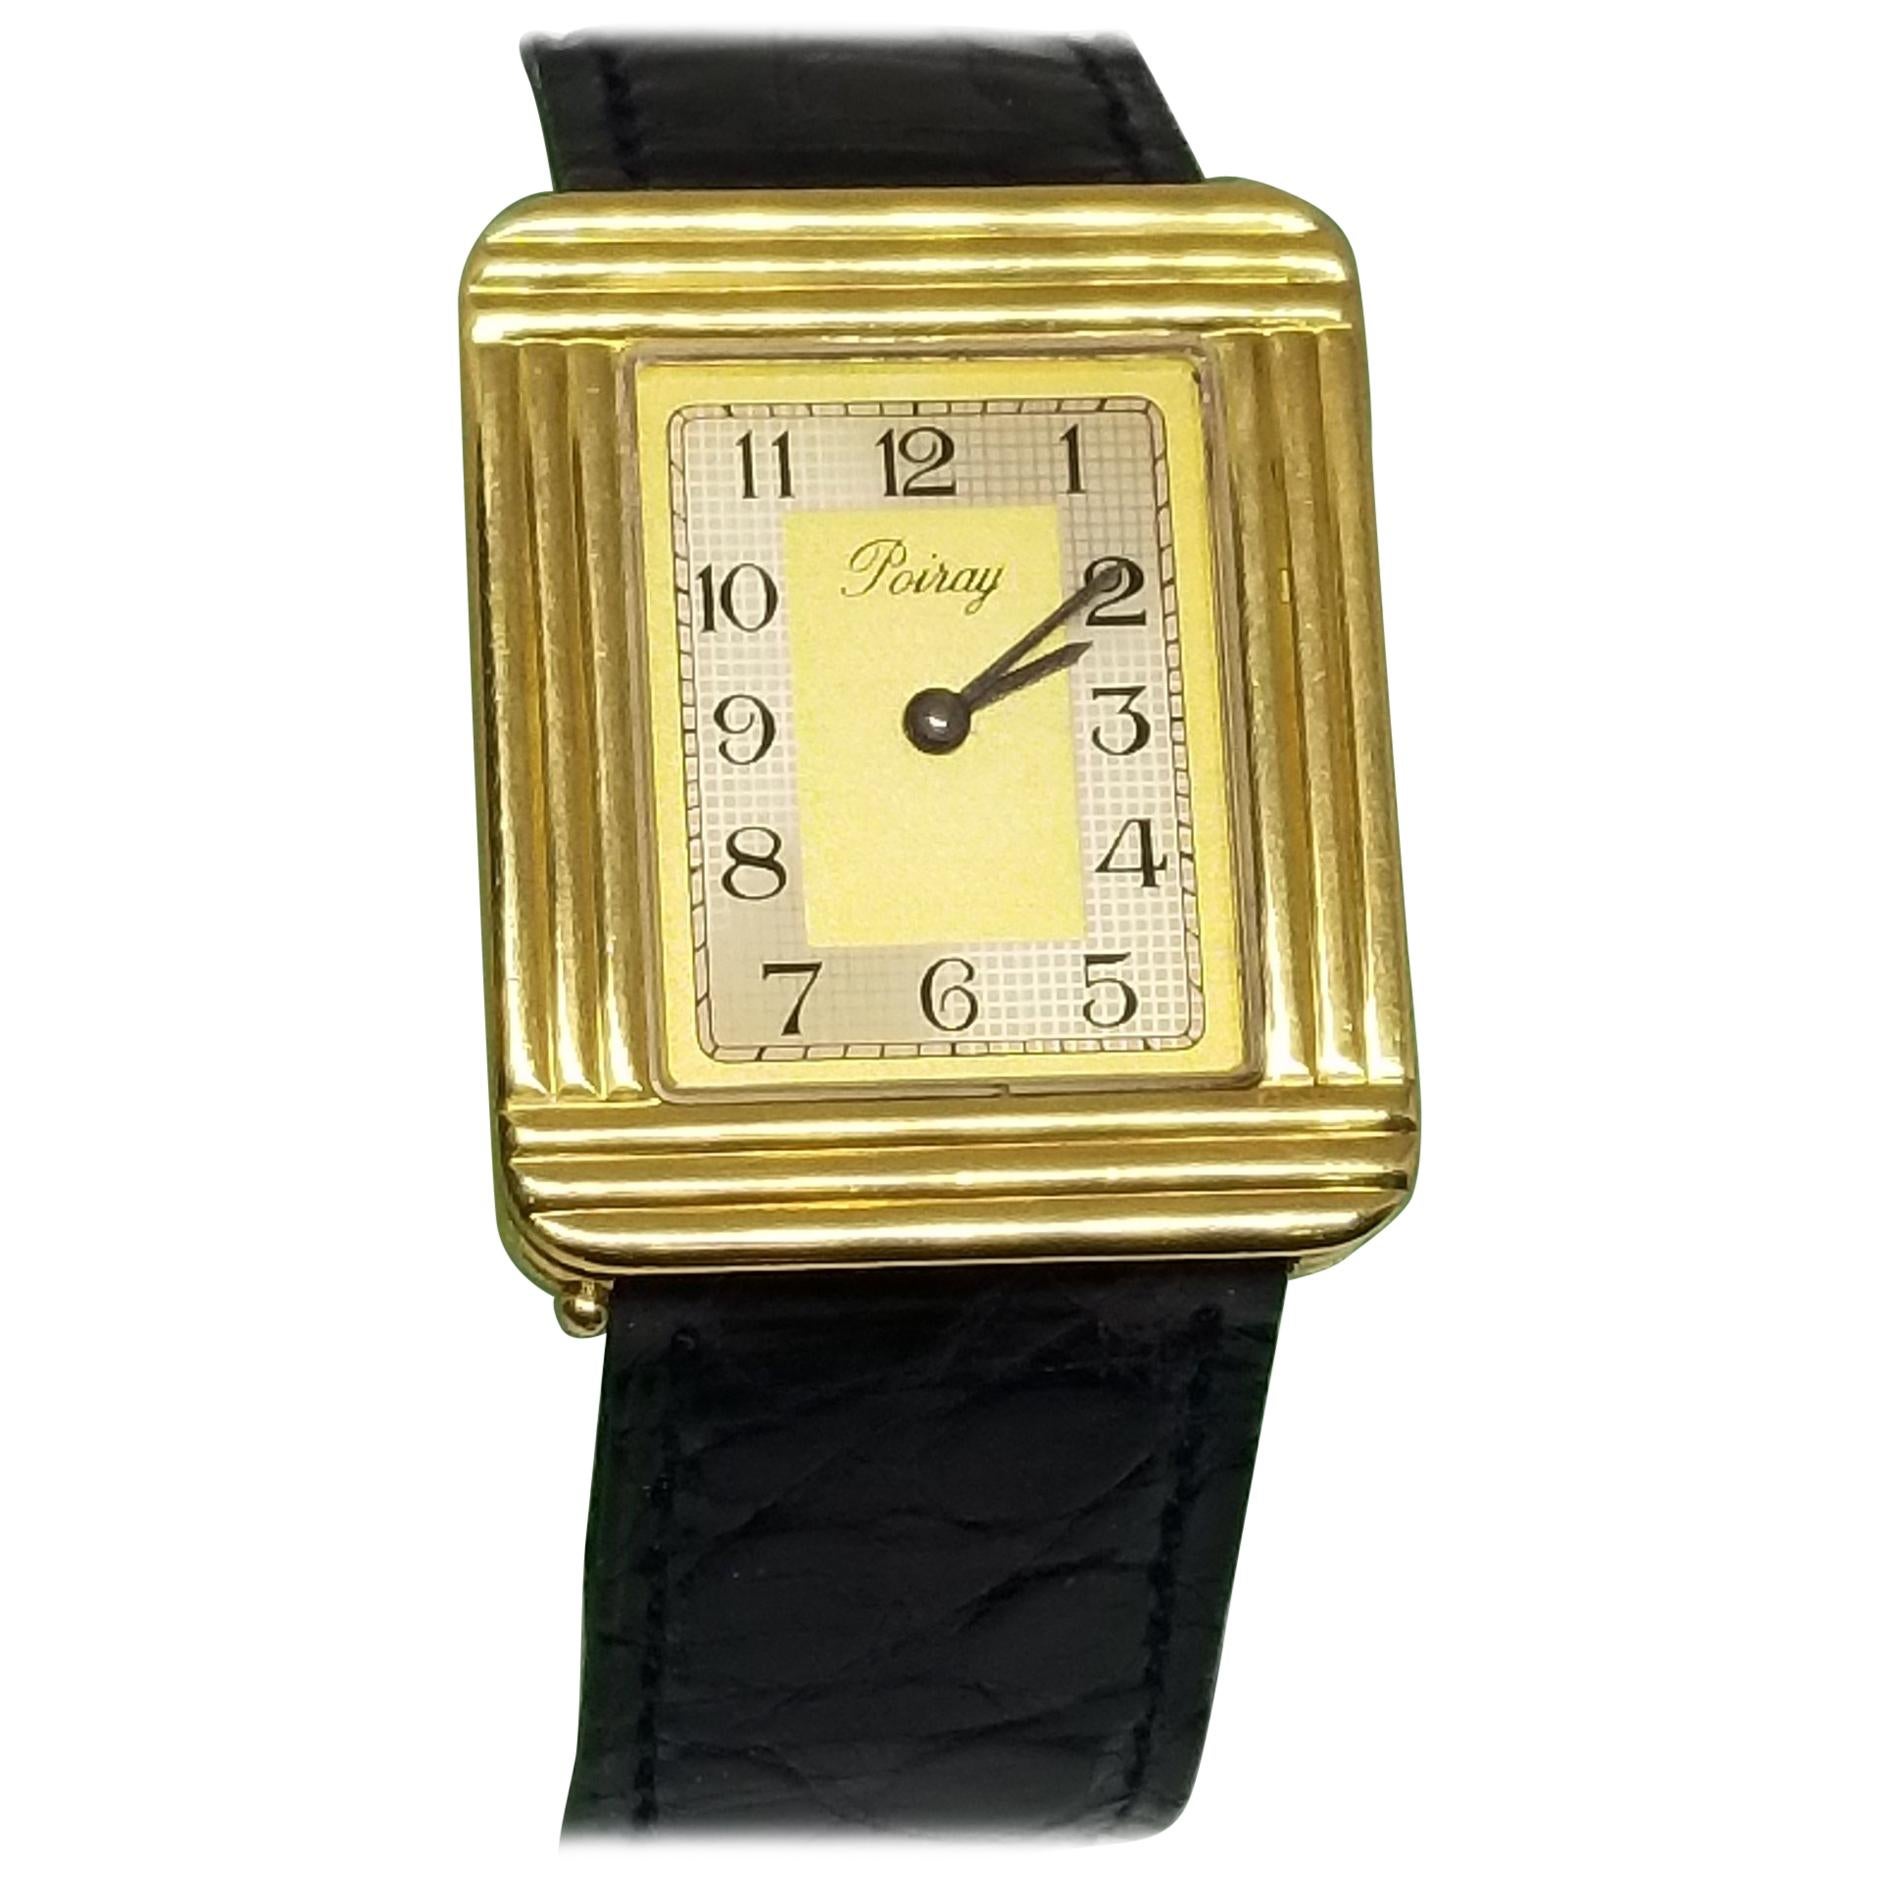 "Poiray" of France 18 Karat Yellow Gold Watch For Sale at 1stDibs